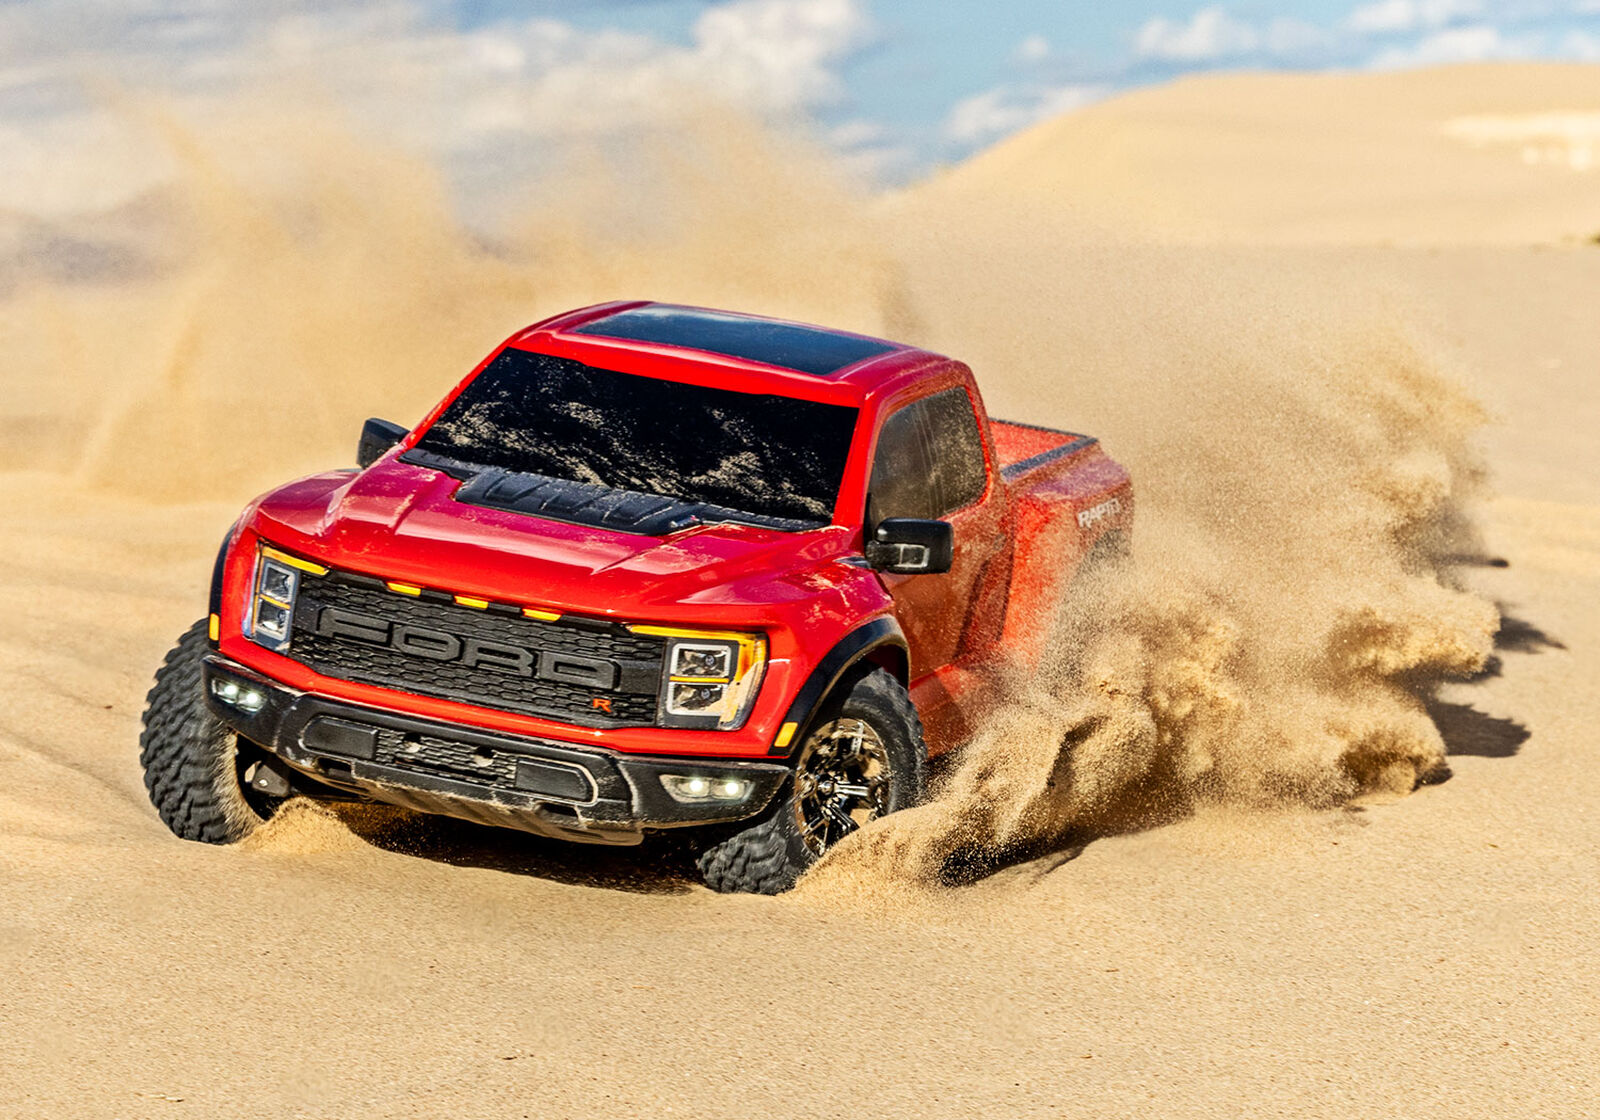 Ford Raptor R: 4X4 VXL 1/10 Scale 4X4 Brushless Replica Truck Red